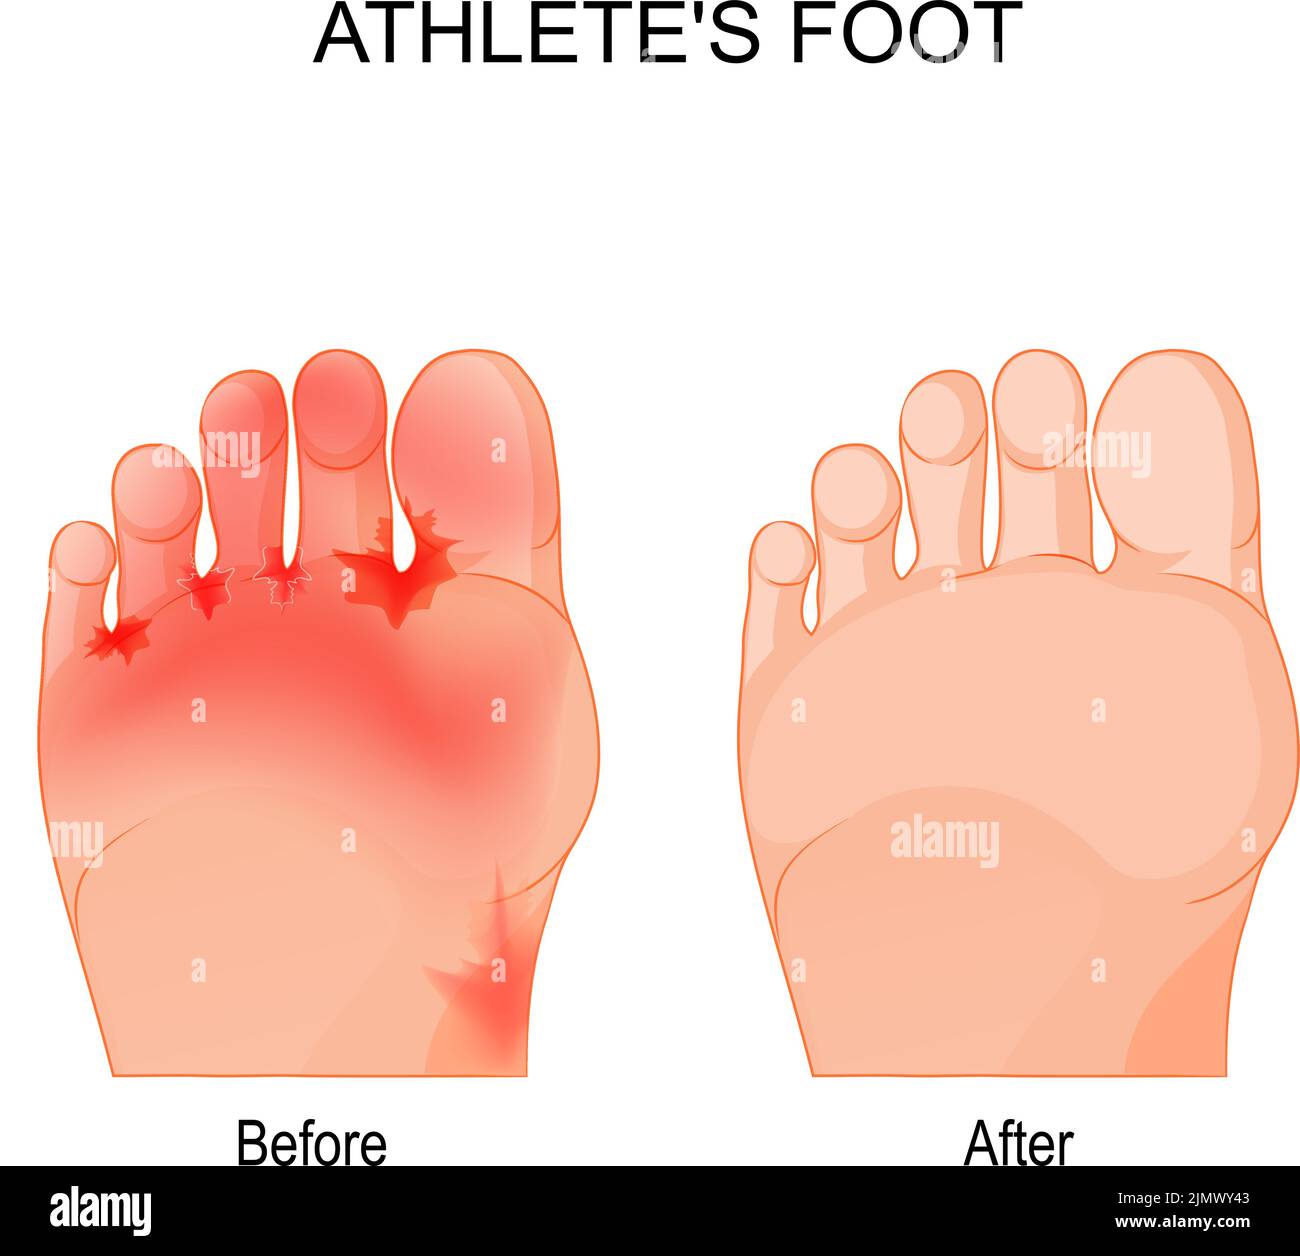 Athlete's foot is a fungal infection that affects the feet. Comparison and difference. Humans feet before and after therapy. vector poster Stock Vector